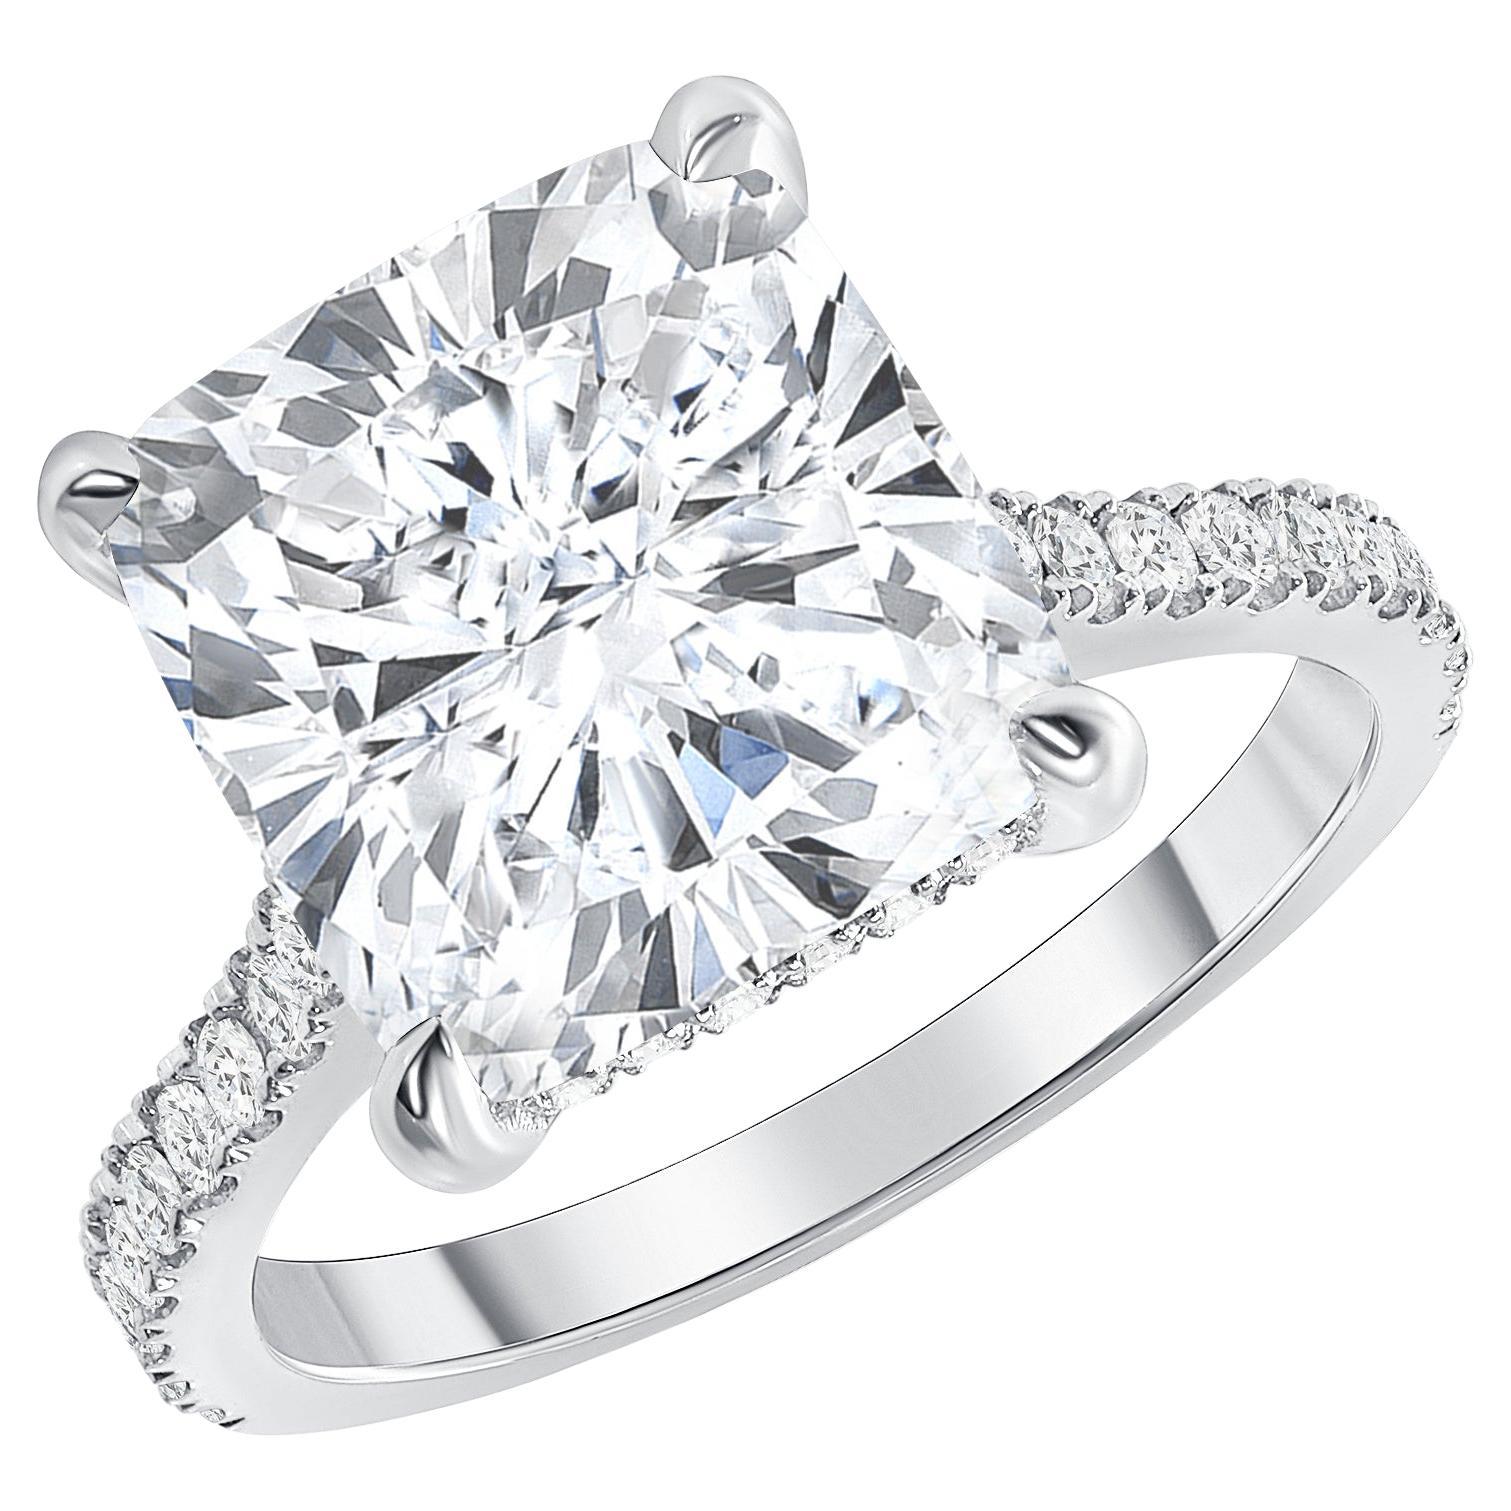 For Sale:  3.60 Carat Cushion Cut Engagement Ring Natural Round Diamonds GIA Certified VS